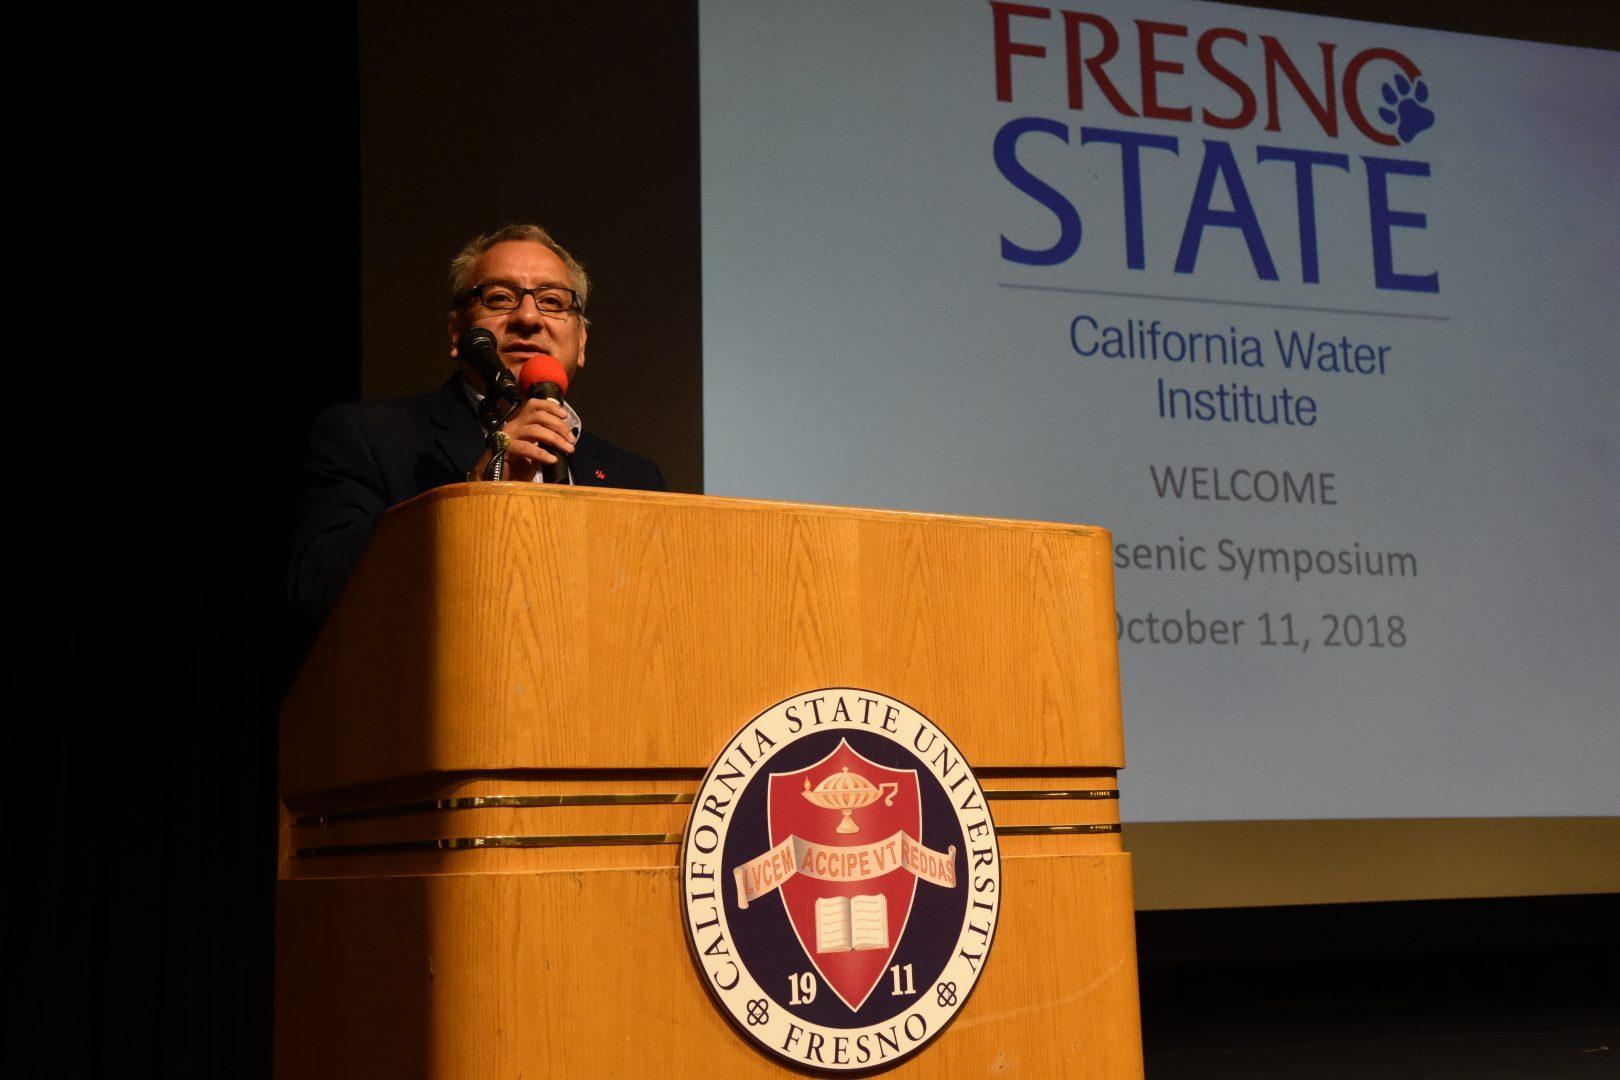 Thomas Esqueda, associate vice president of water and sustainability at Fresno State and executive director of the California Water Institute discusses groundwater contamination and overpumping at the Arsenic Symposium at Fresno State on Oct. 11. (Courtesy of Jordan College of Ag Sciences and Technology)